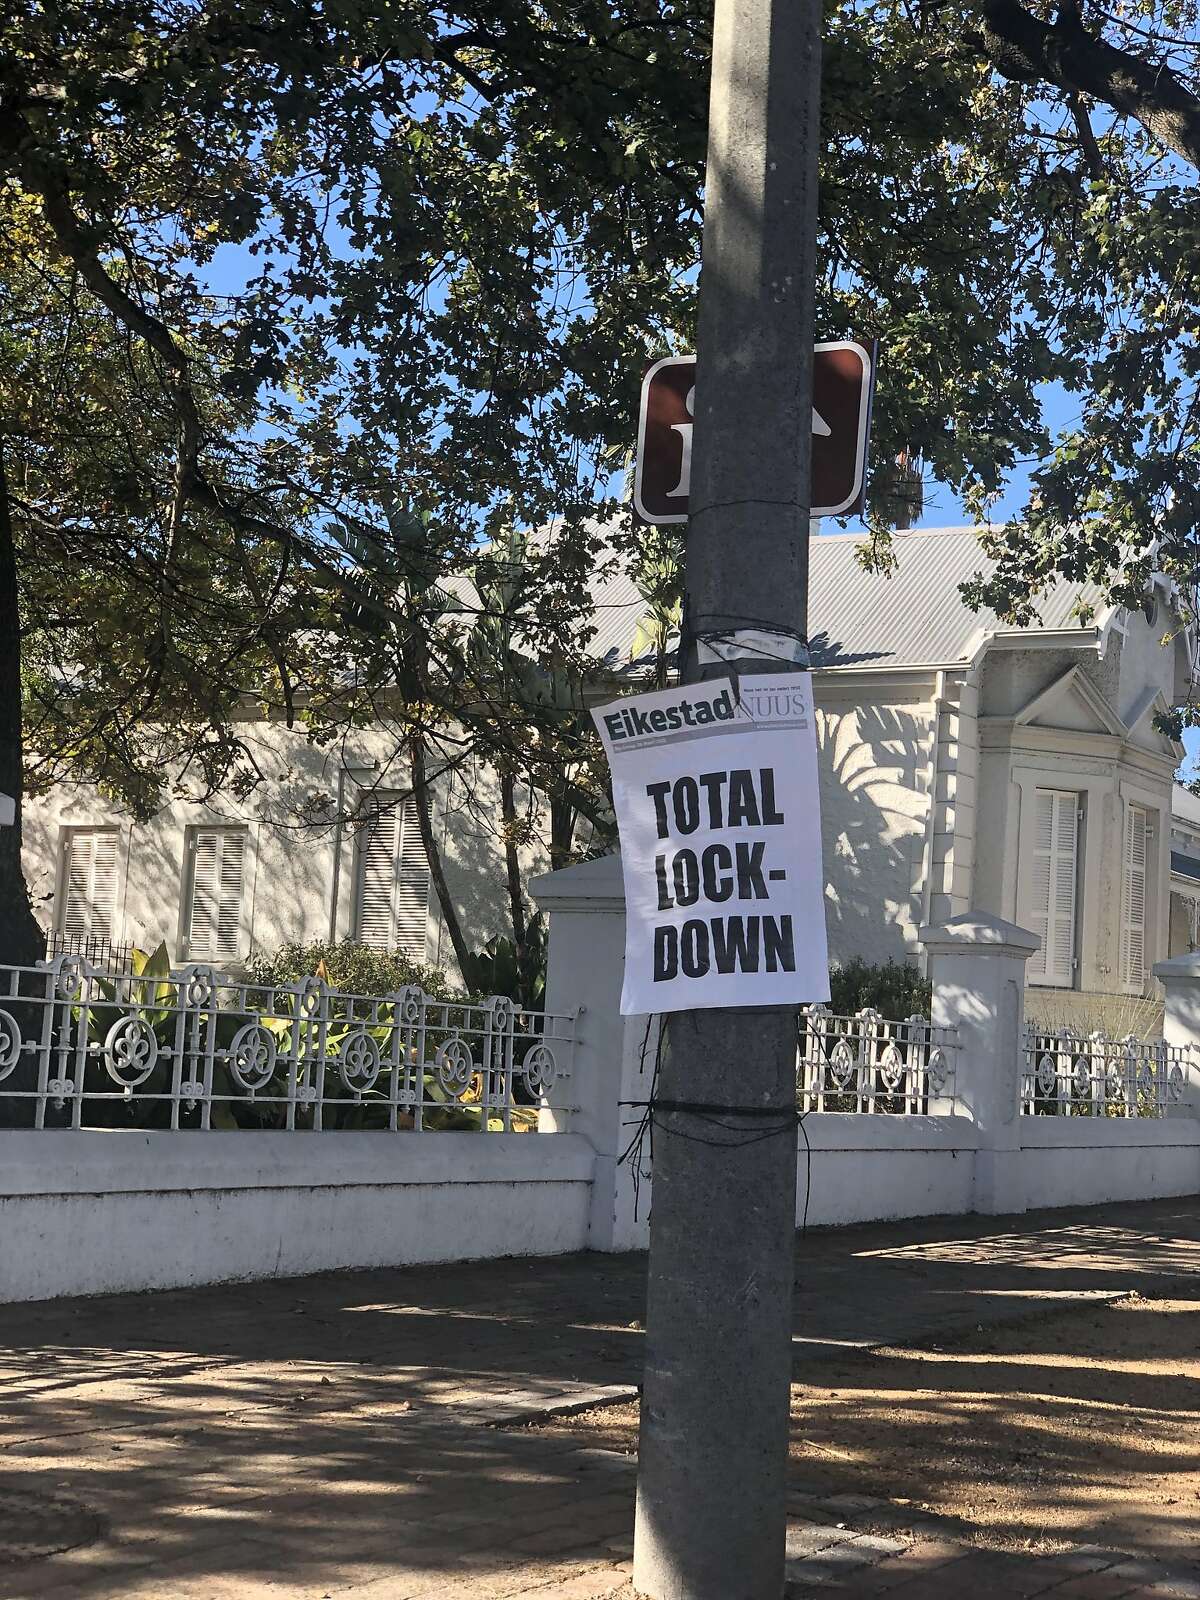 A shelter-in-place notice in South Africa.